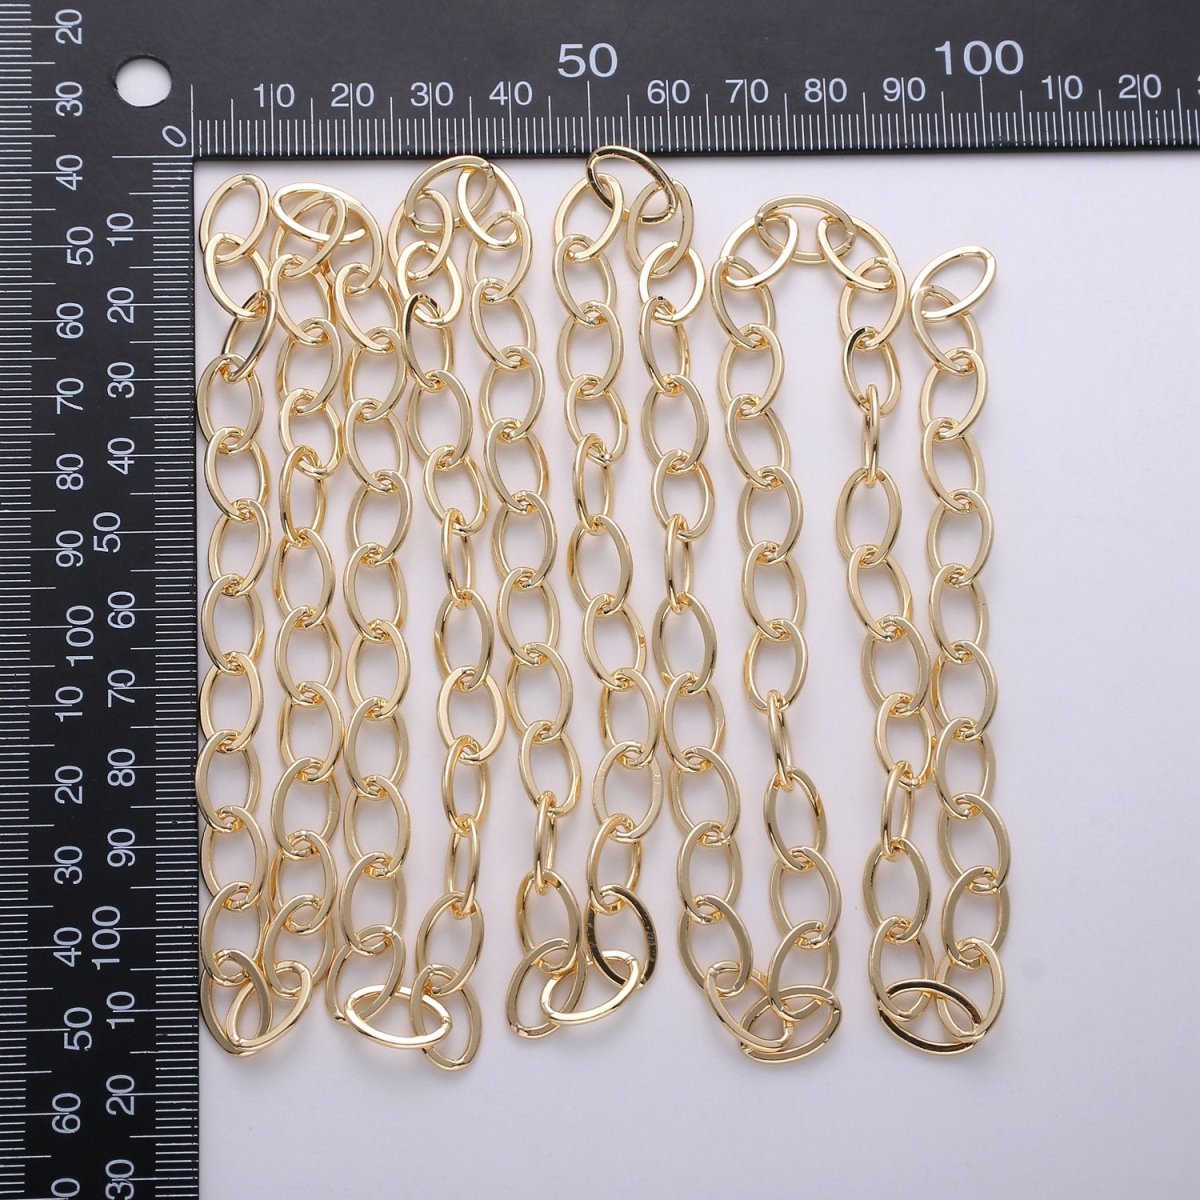 24K Gold Filled Rolo Unfinished Chain, 8X12mm Width, Thin Flat Minimalist Rolo For Jewelry Making, For Necklace, Bracelet, Anklet Supply Component | ROLL-259 Clearance Pricing - DLUXCA